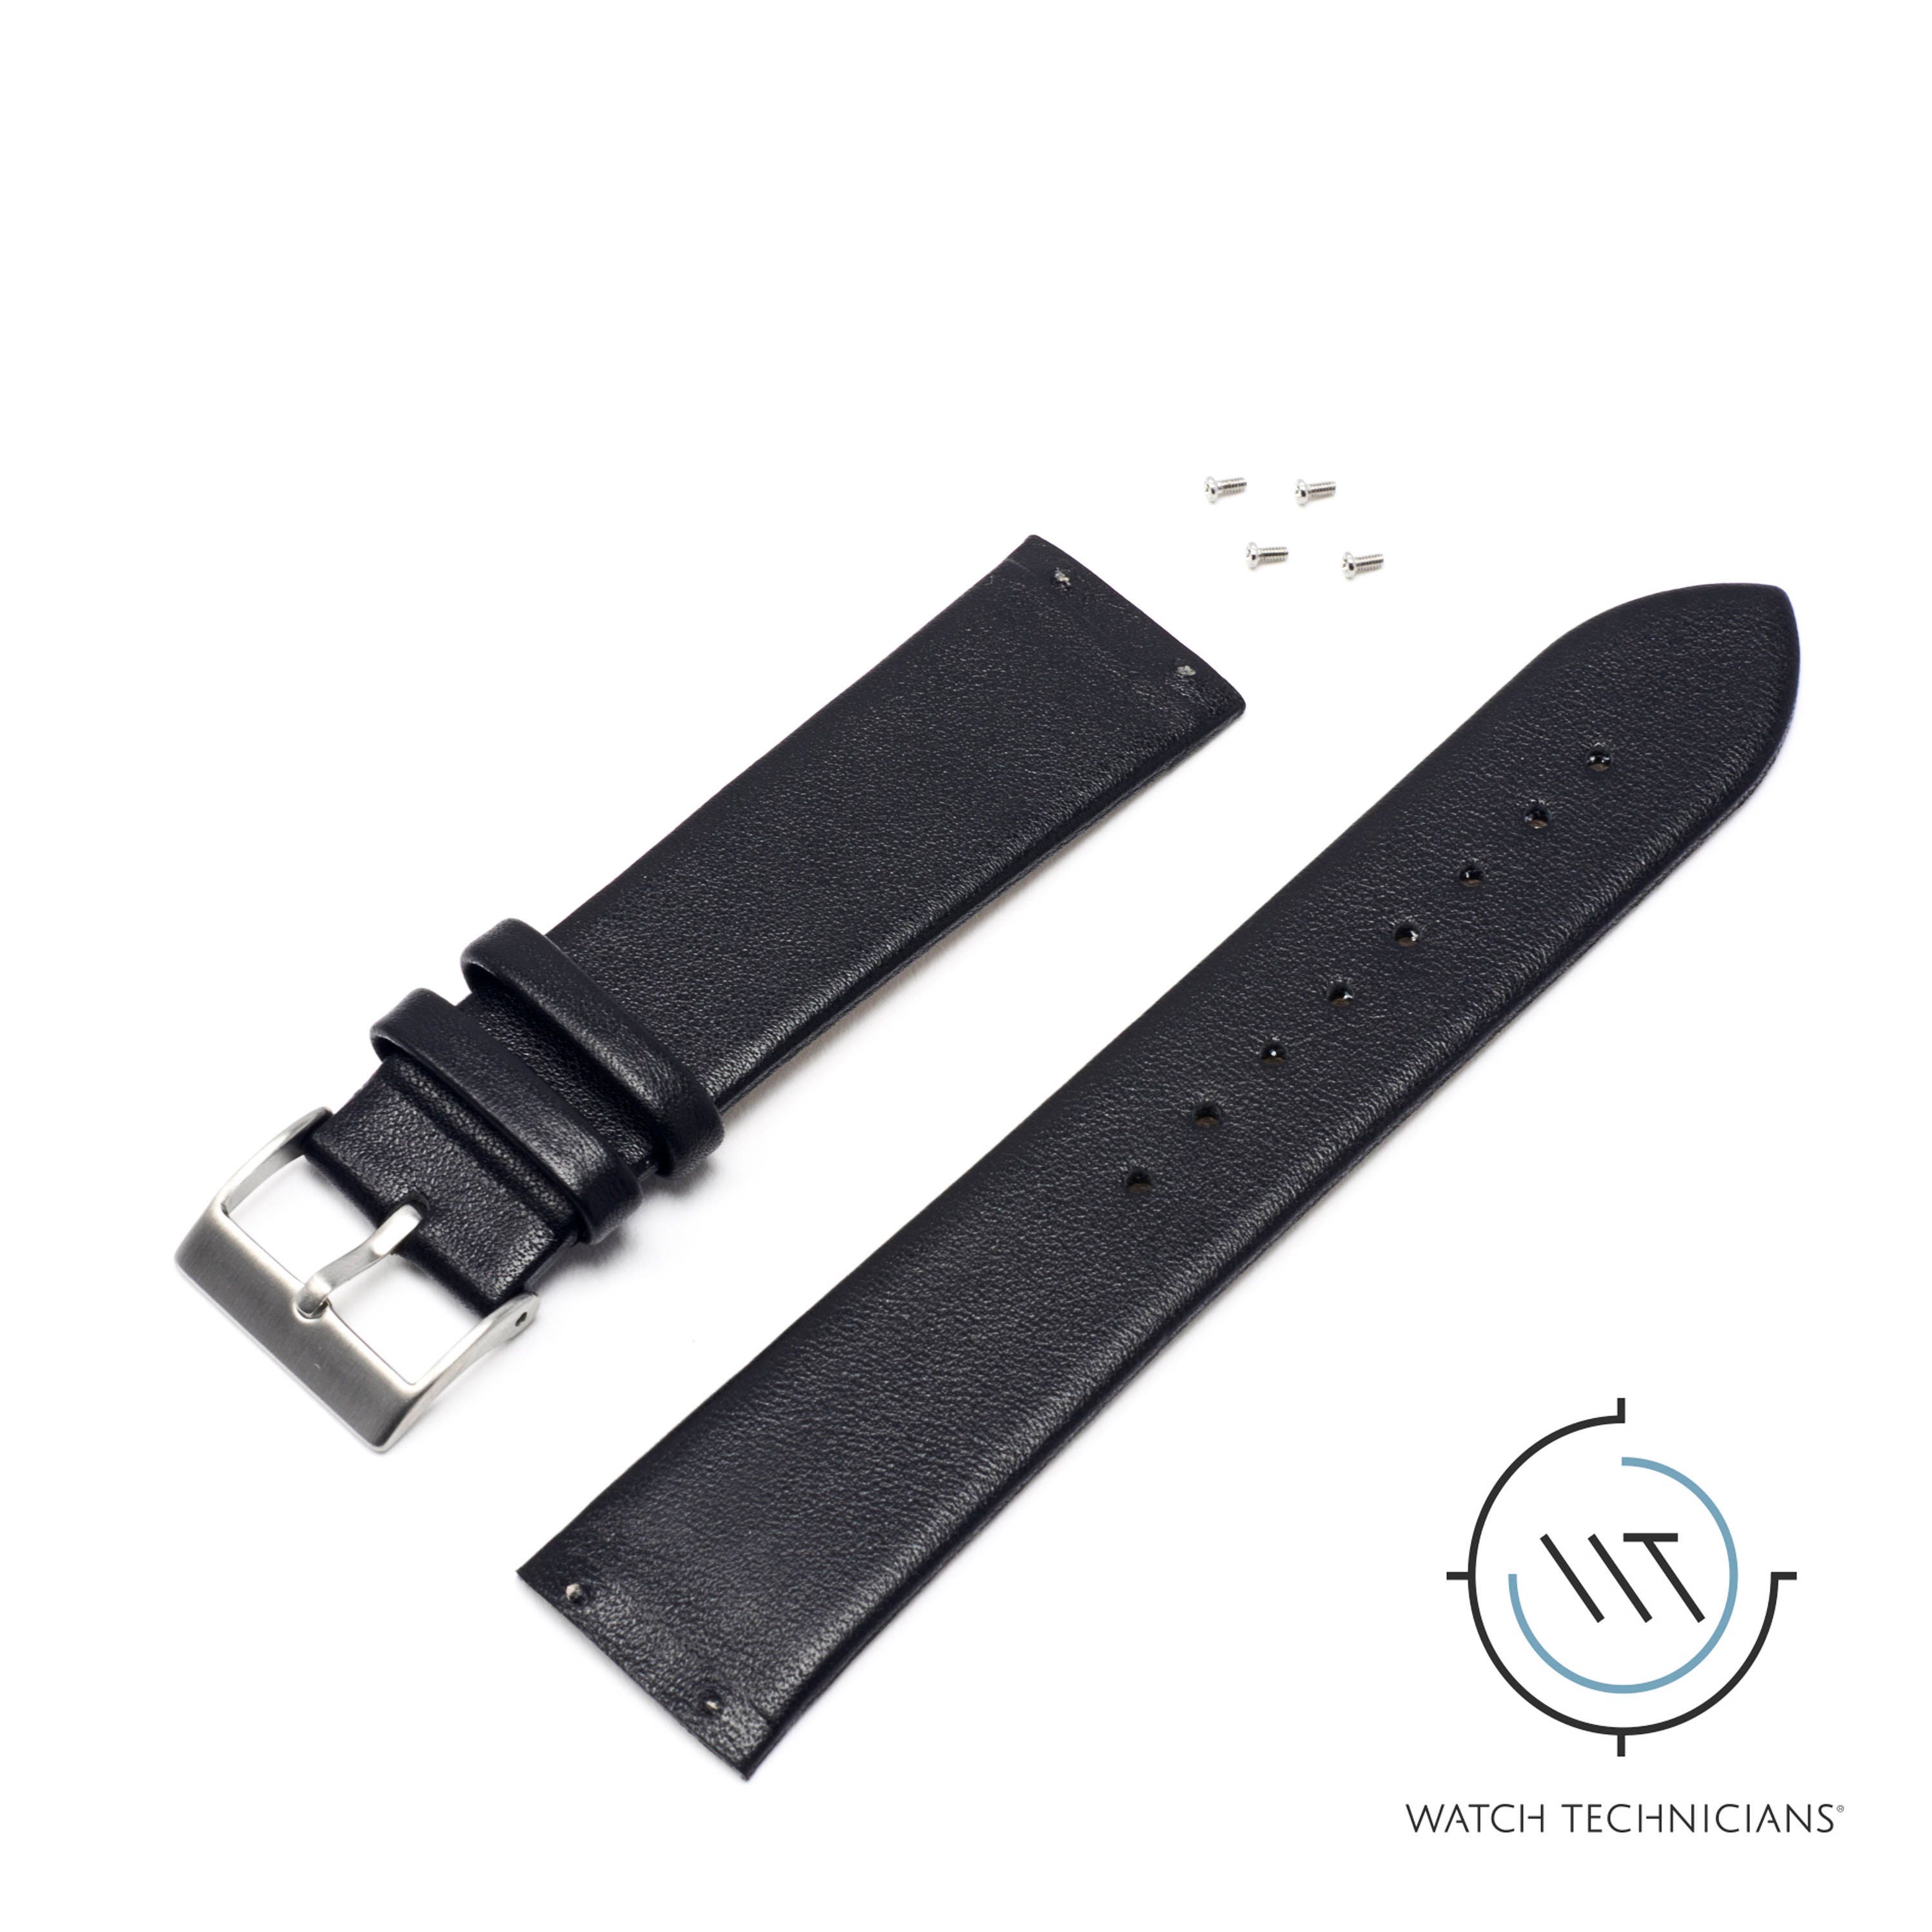 Skagen Genuine Leather Watch Strap/Band Replacement